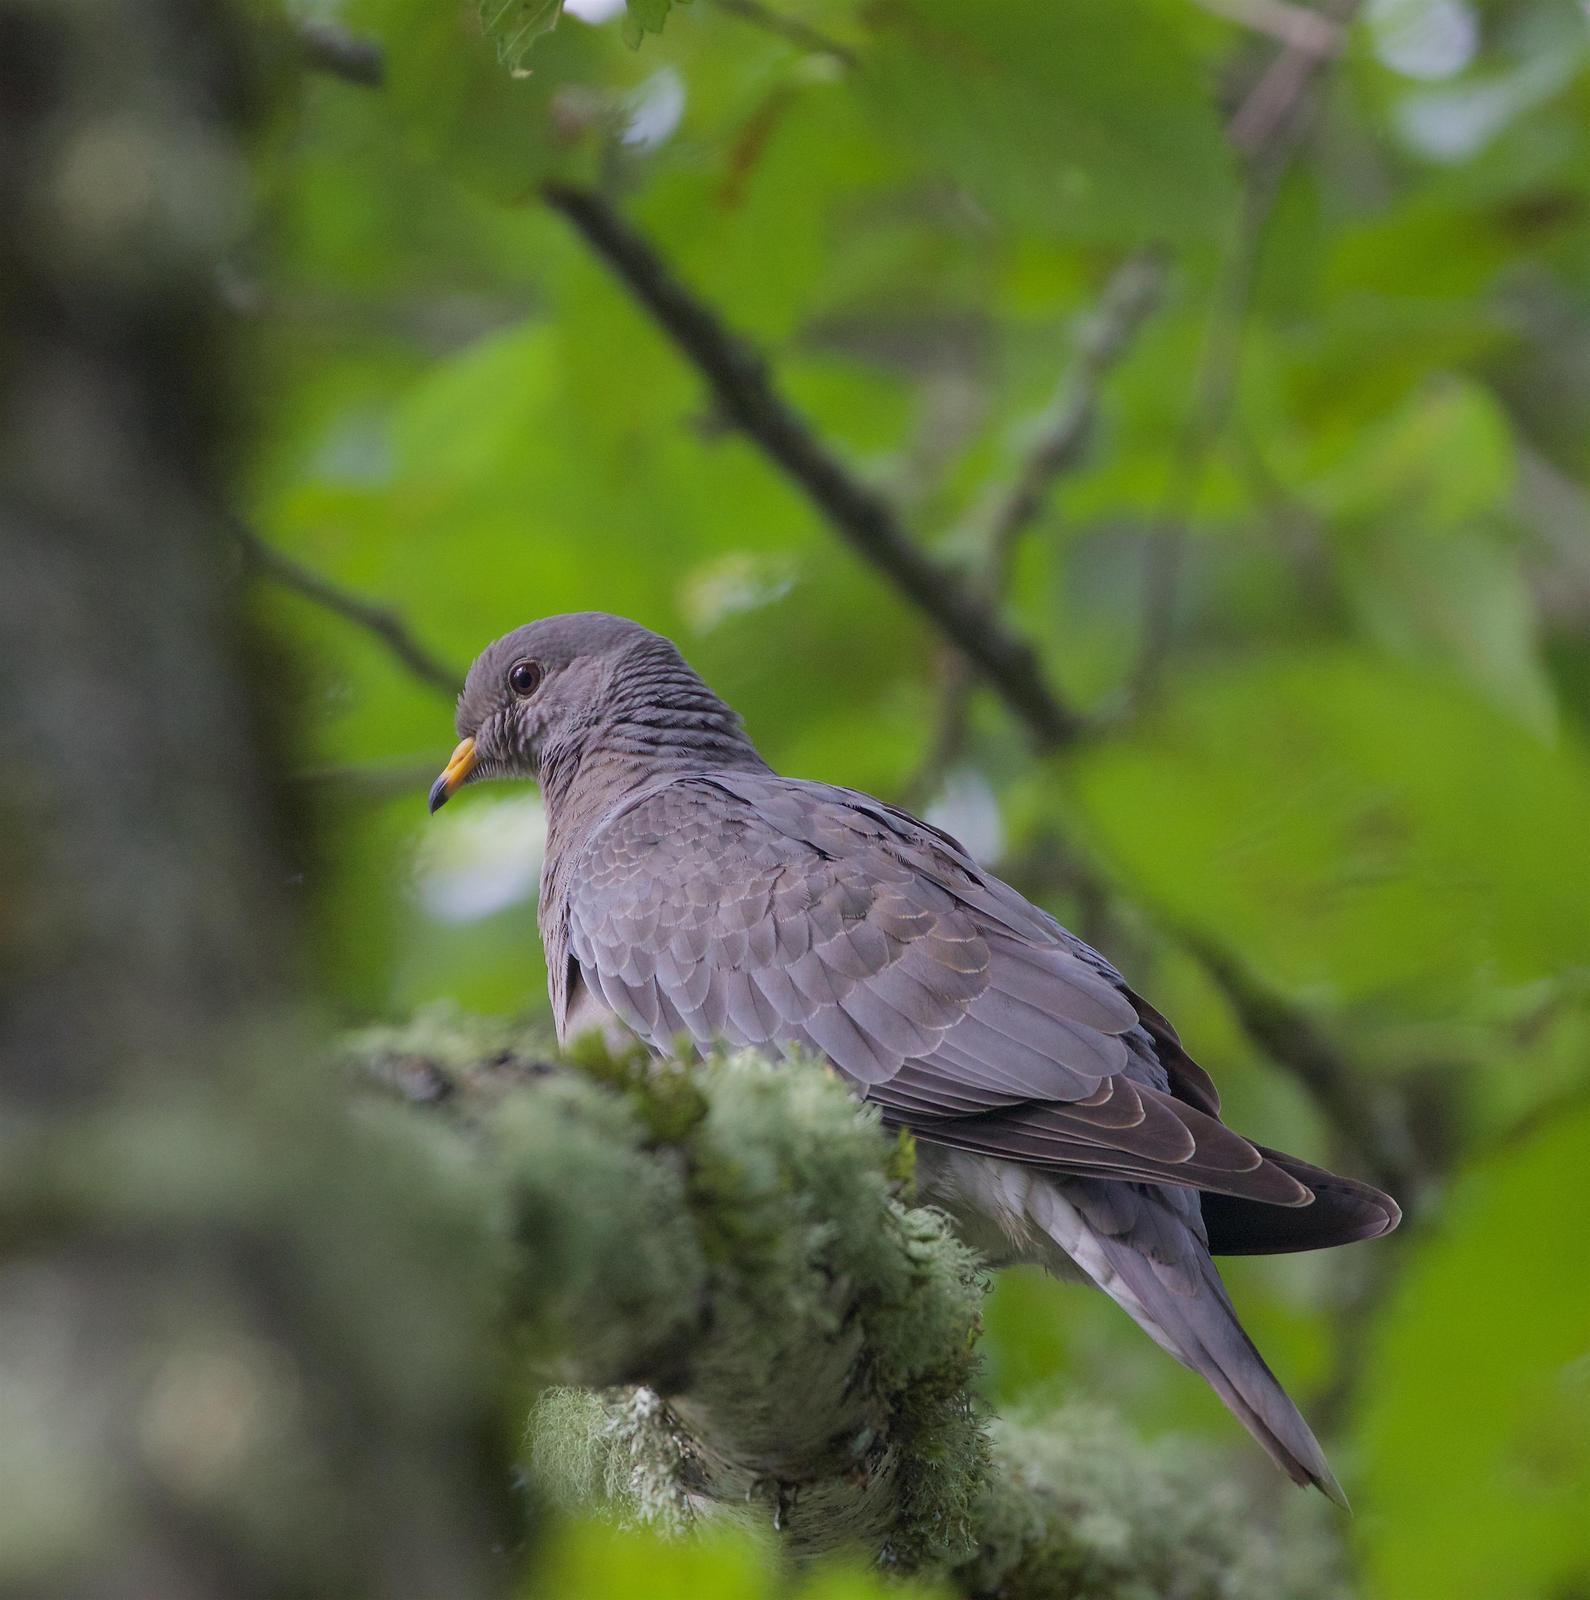 Band-tailed Pigeon Photo by Kathryn Keith